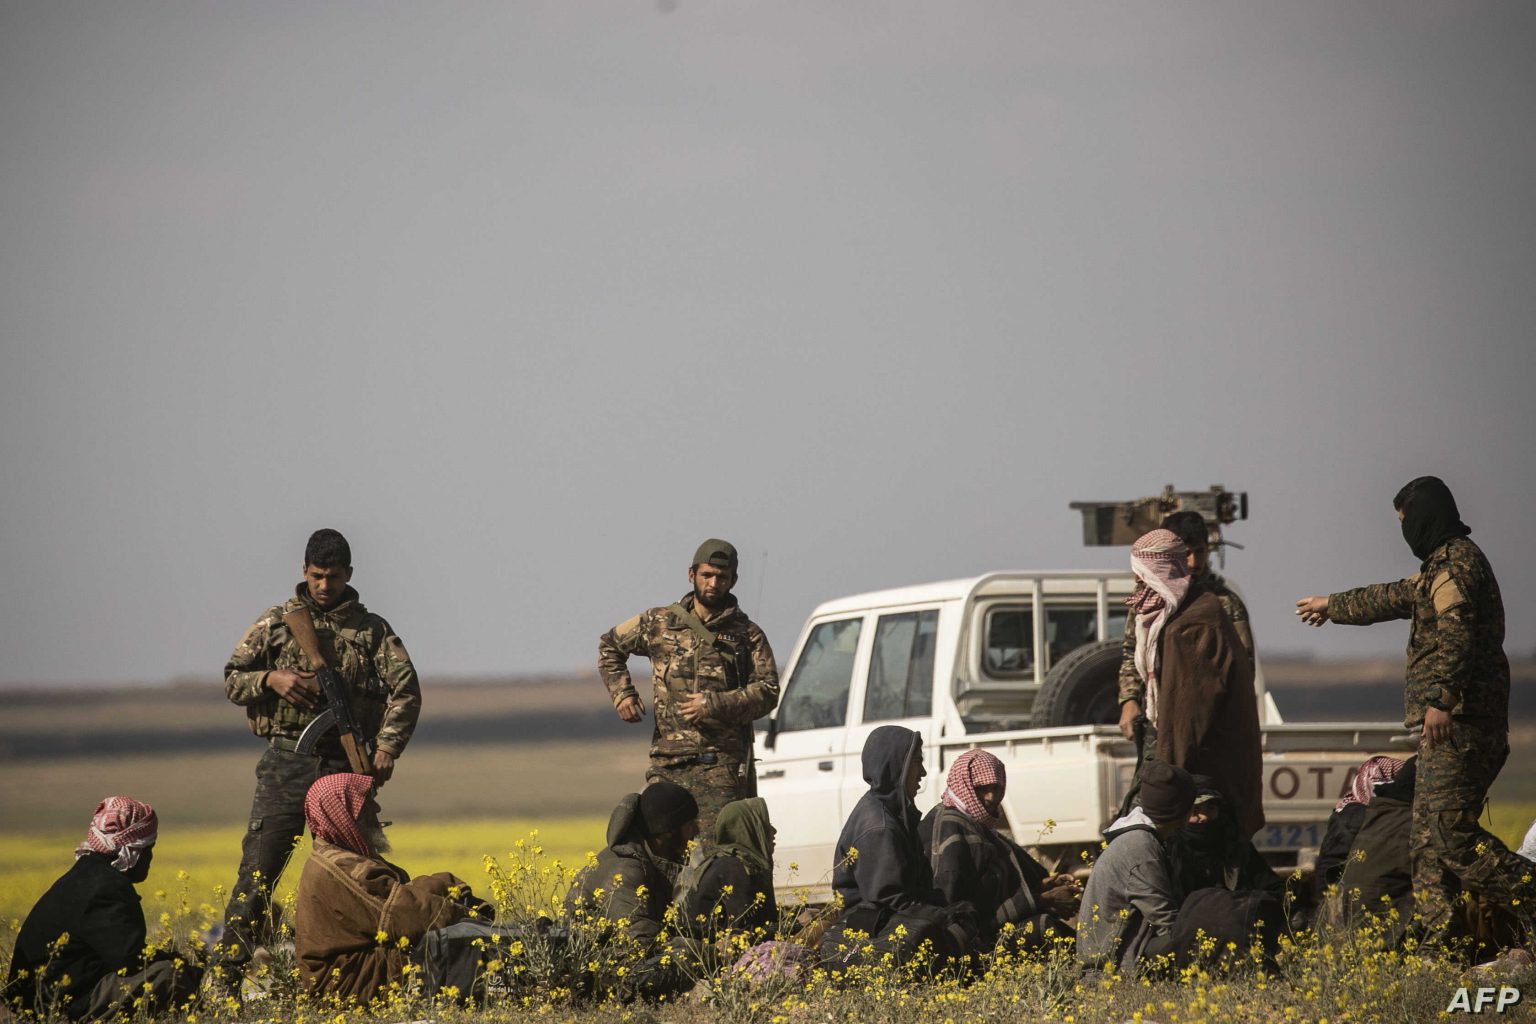 SDF fighters detaining IS militants in the al-Baghouz region — 14 March 2019 (AFP)